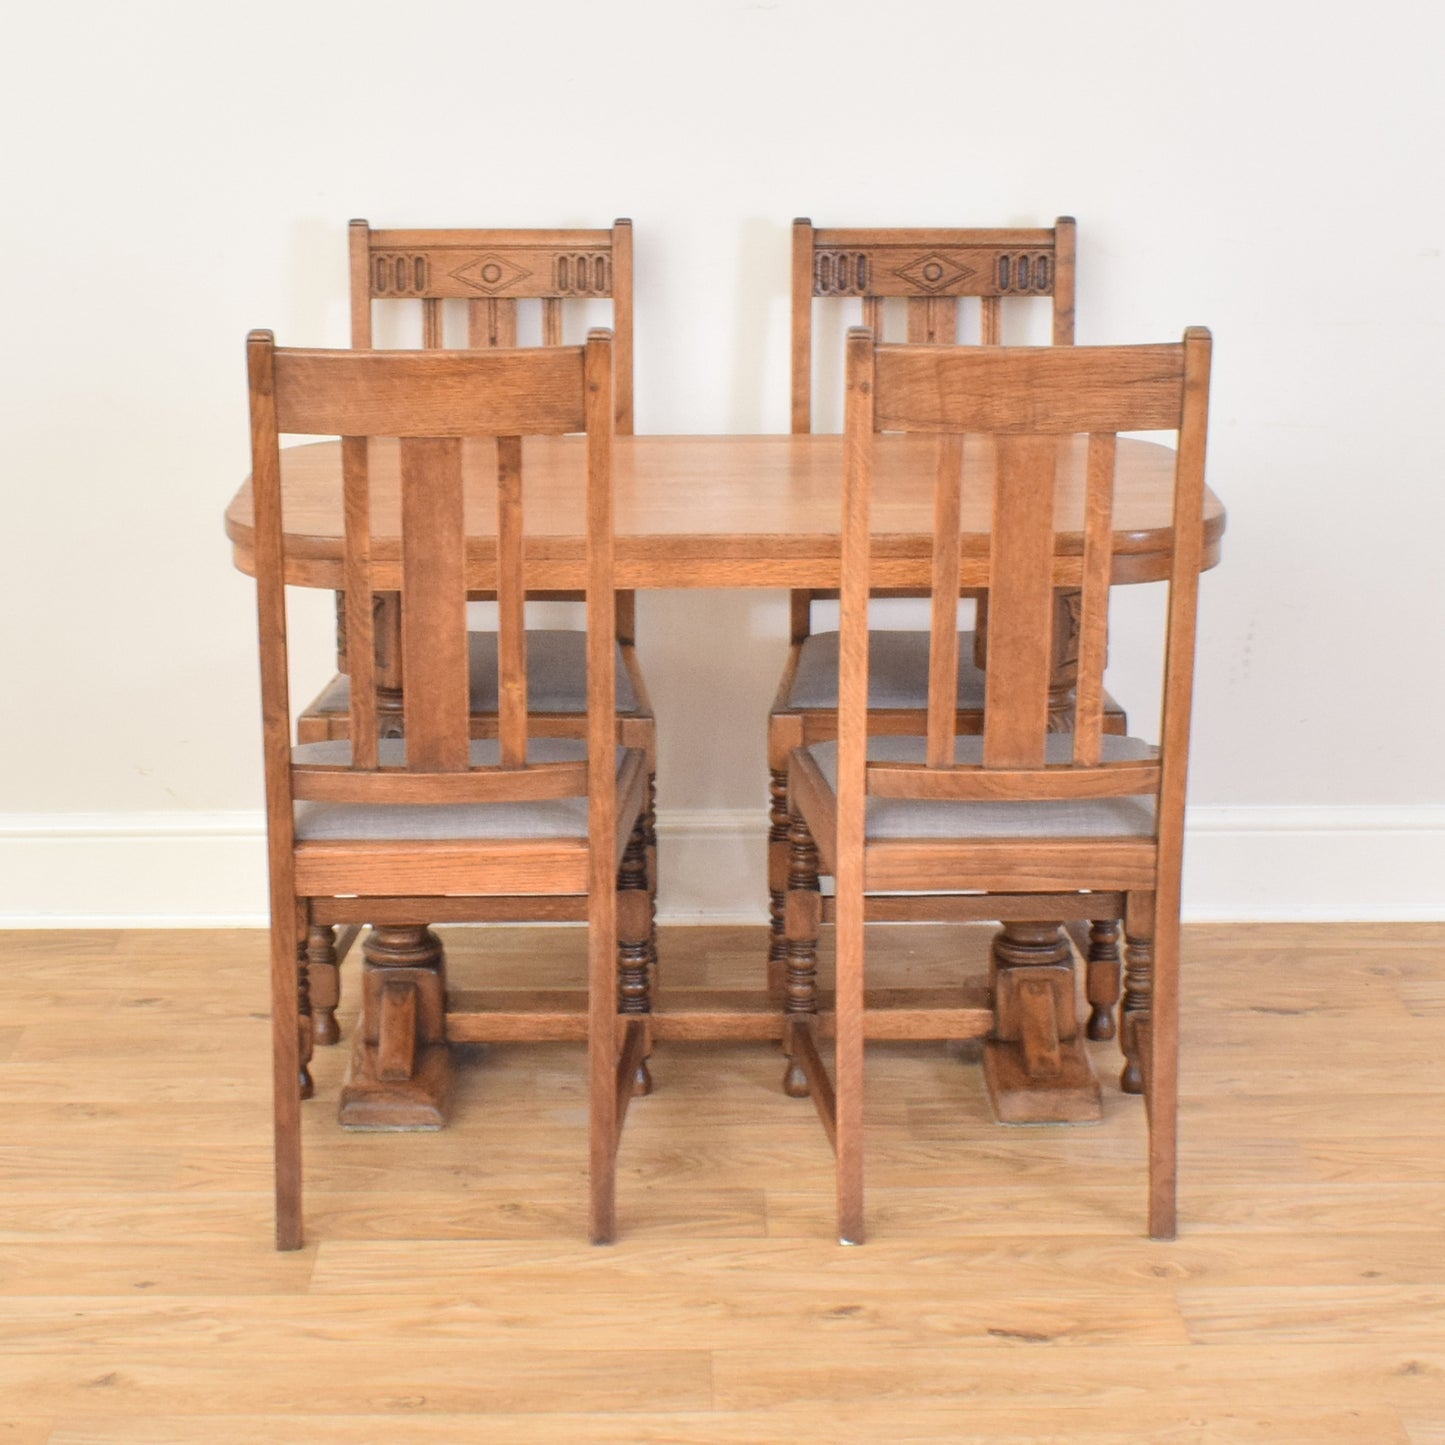 Oak Table And Four Chairs